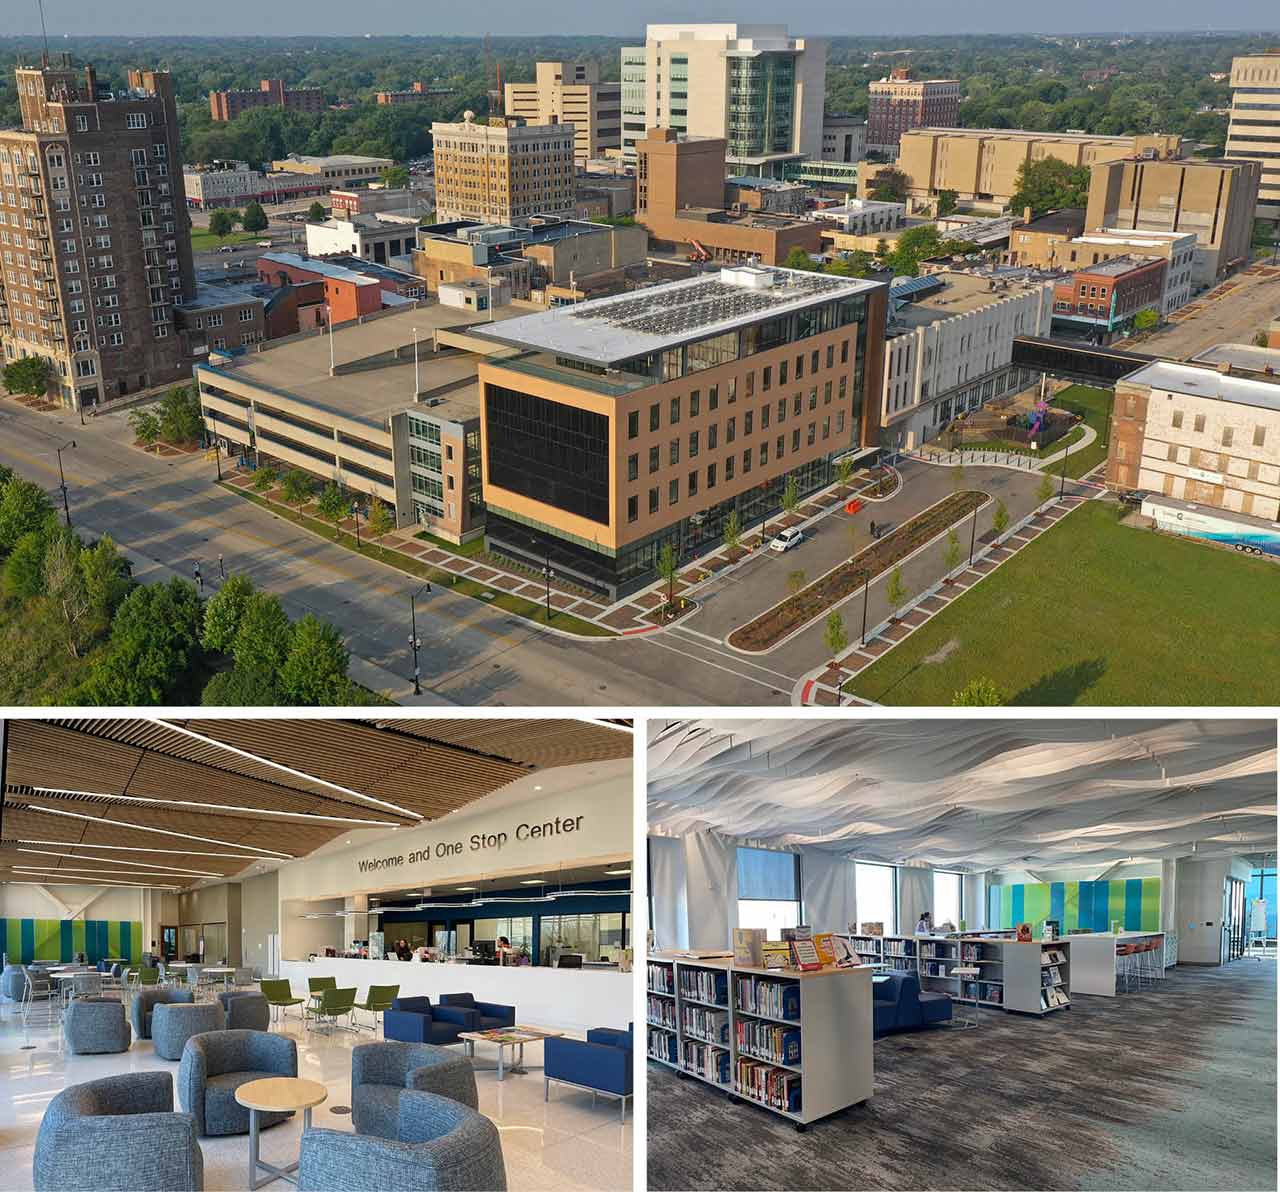 Views of College of Lake County Lakeshore Campus Student Center: aerial, Welcome and One Stop Center, library